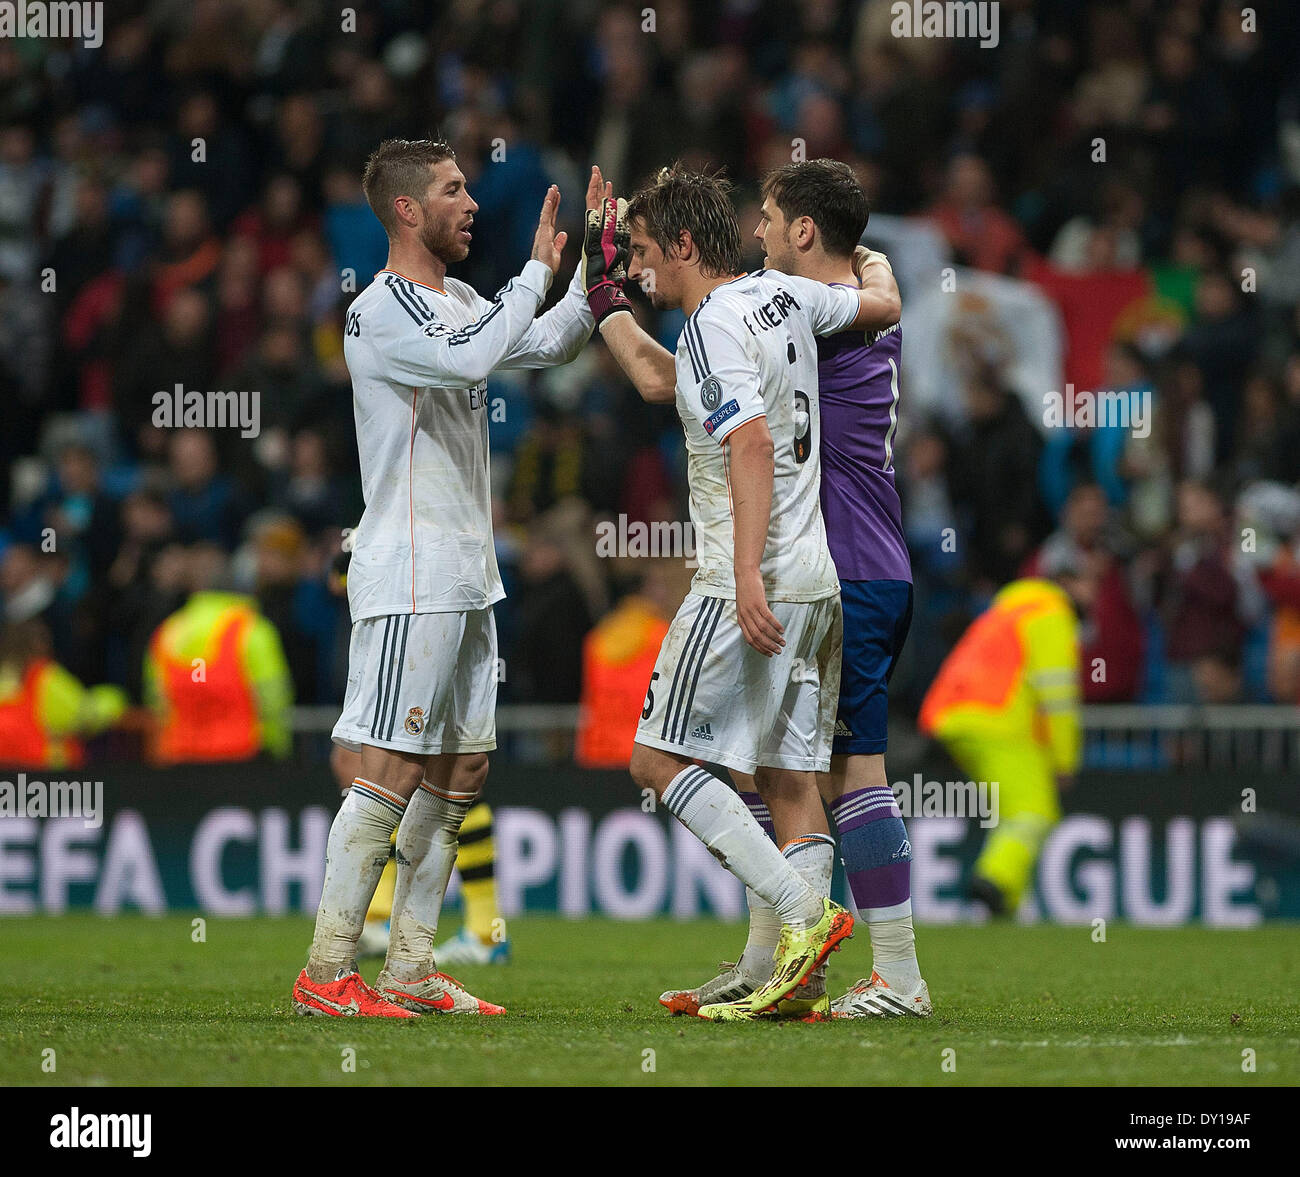 Madrid, Spain. 2nd Apr, 2014. (From R to L)Real Madrid's Iker Casillas, Fabio Coentrao and Sergio Ramos celebrate victory over Dortmund after the UEFA Champions League quarter-final first leg match at Santiago Bernabeu stadium in Madrid, Spain, April 2, 2014. Real Madrid won the match by 3-0. Credit:  Xie Haining/Xinhua/Alamy Live News Stock Photo